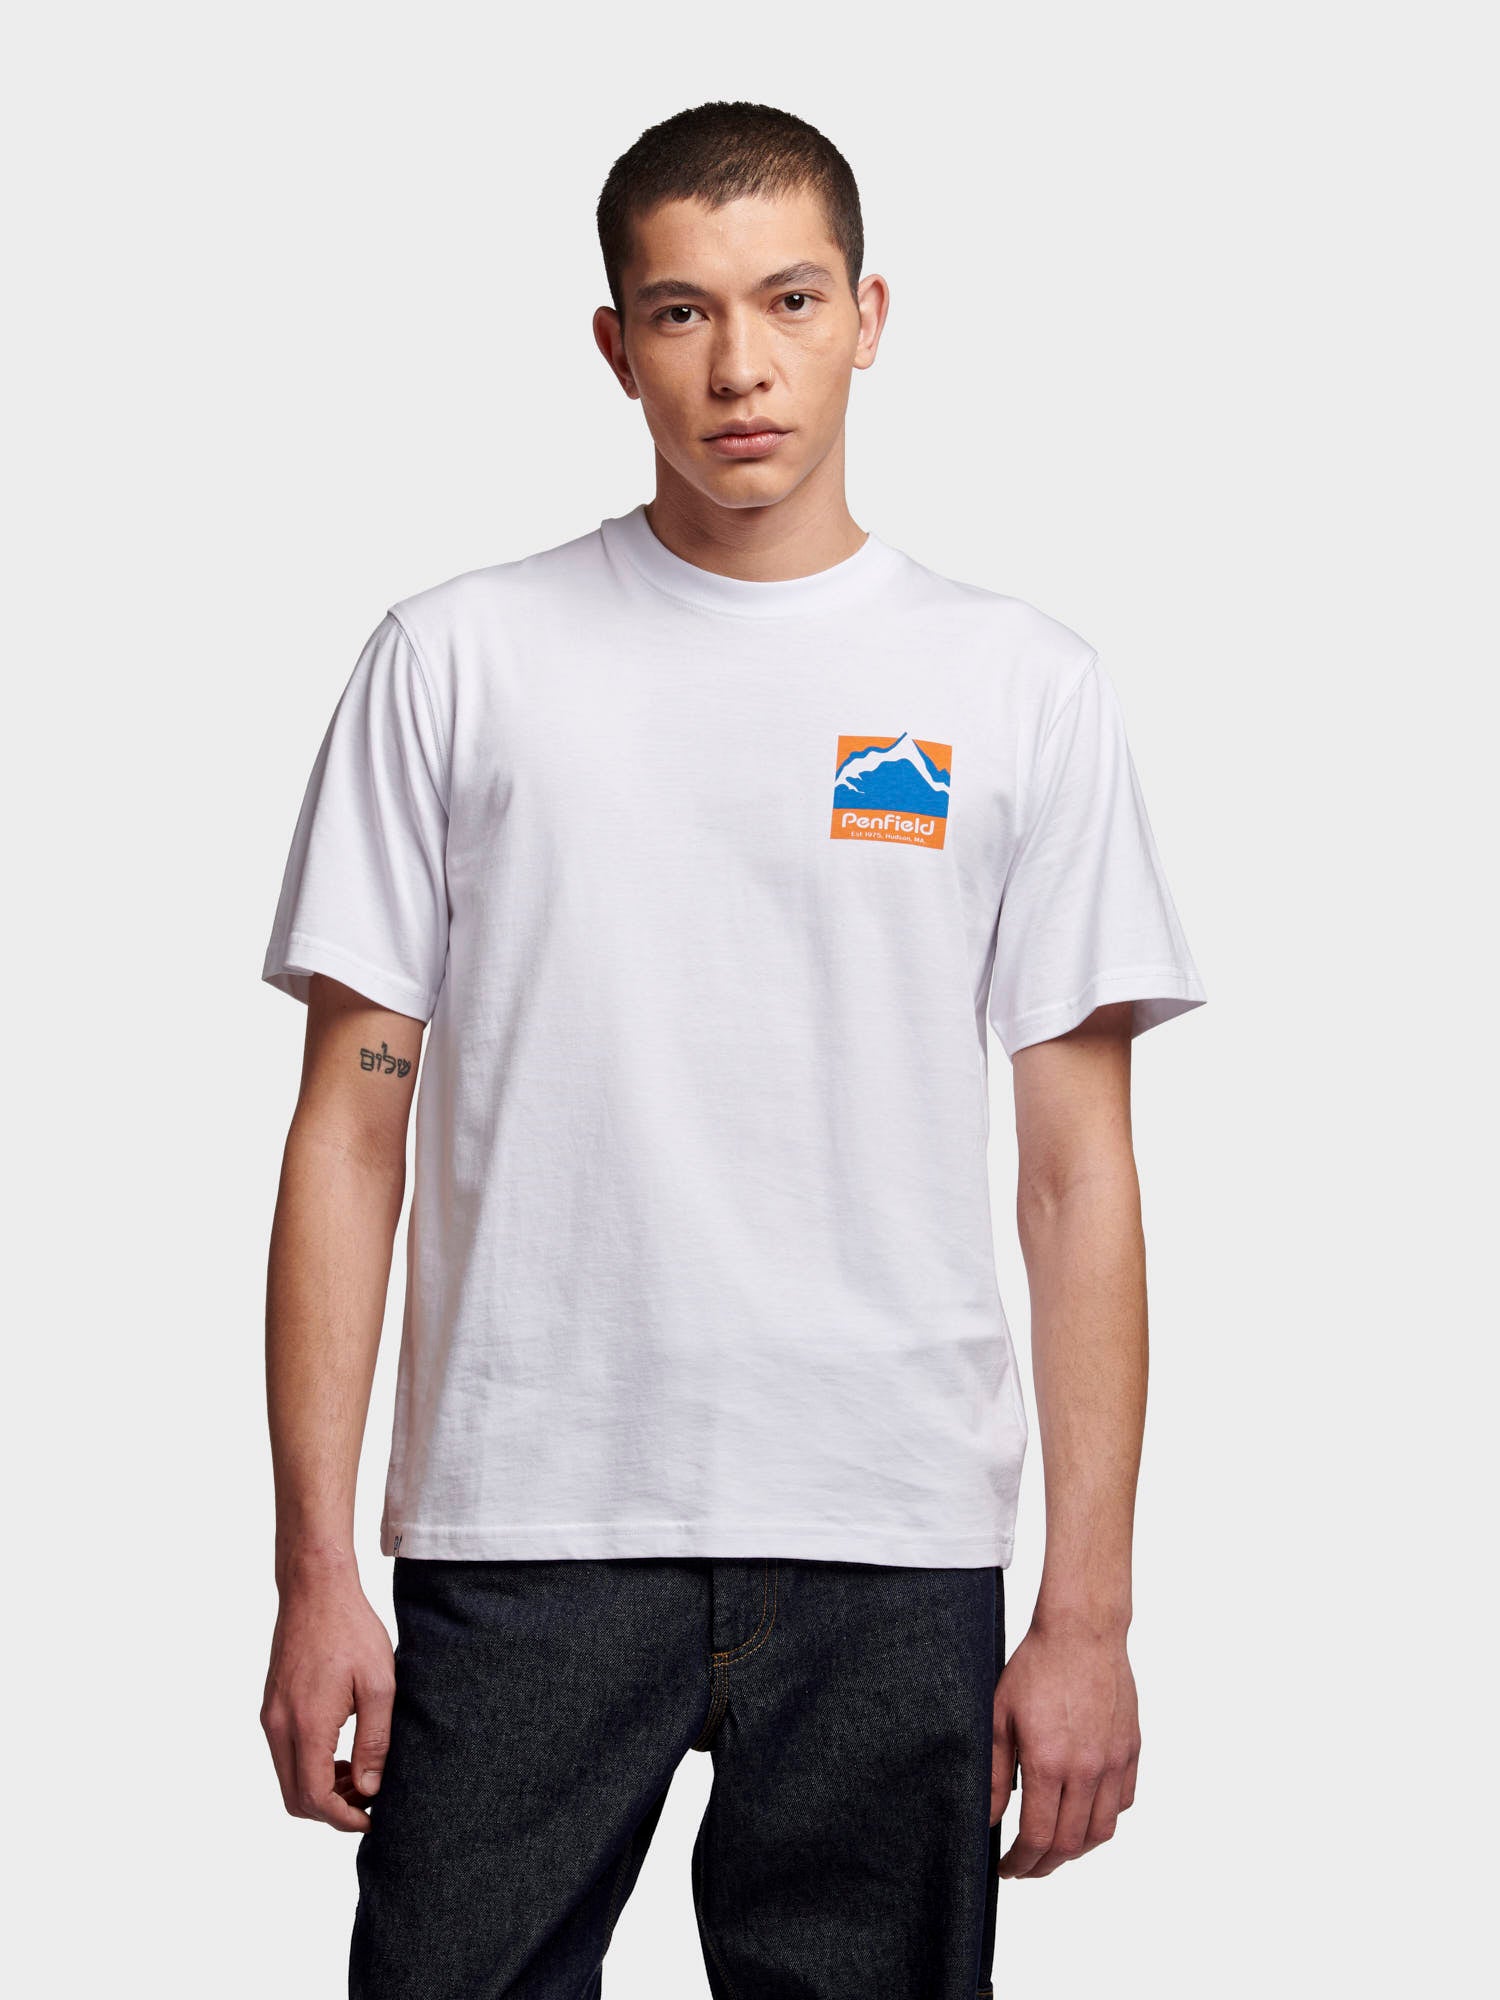 Relaxed Fit Mountain Scene Back Graphic T-Shirt in Bright White